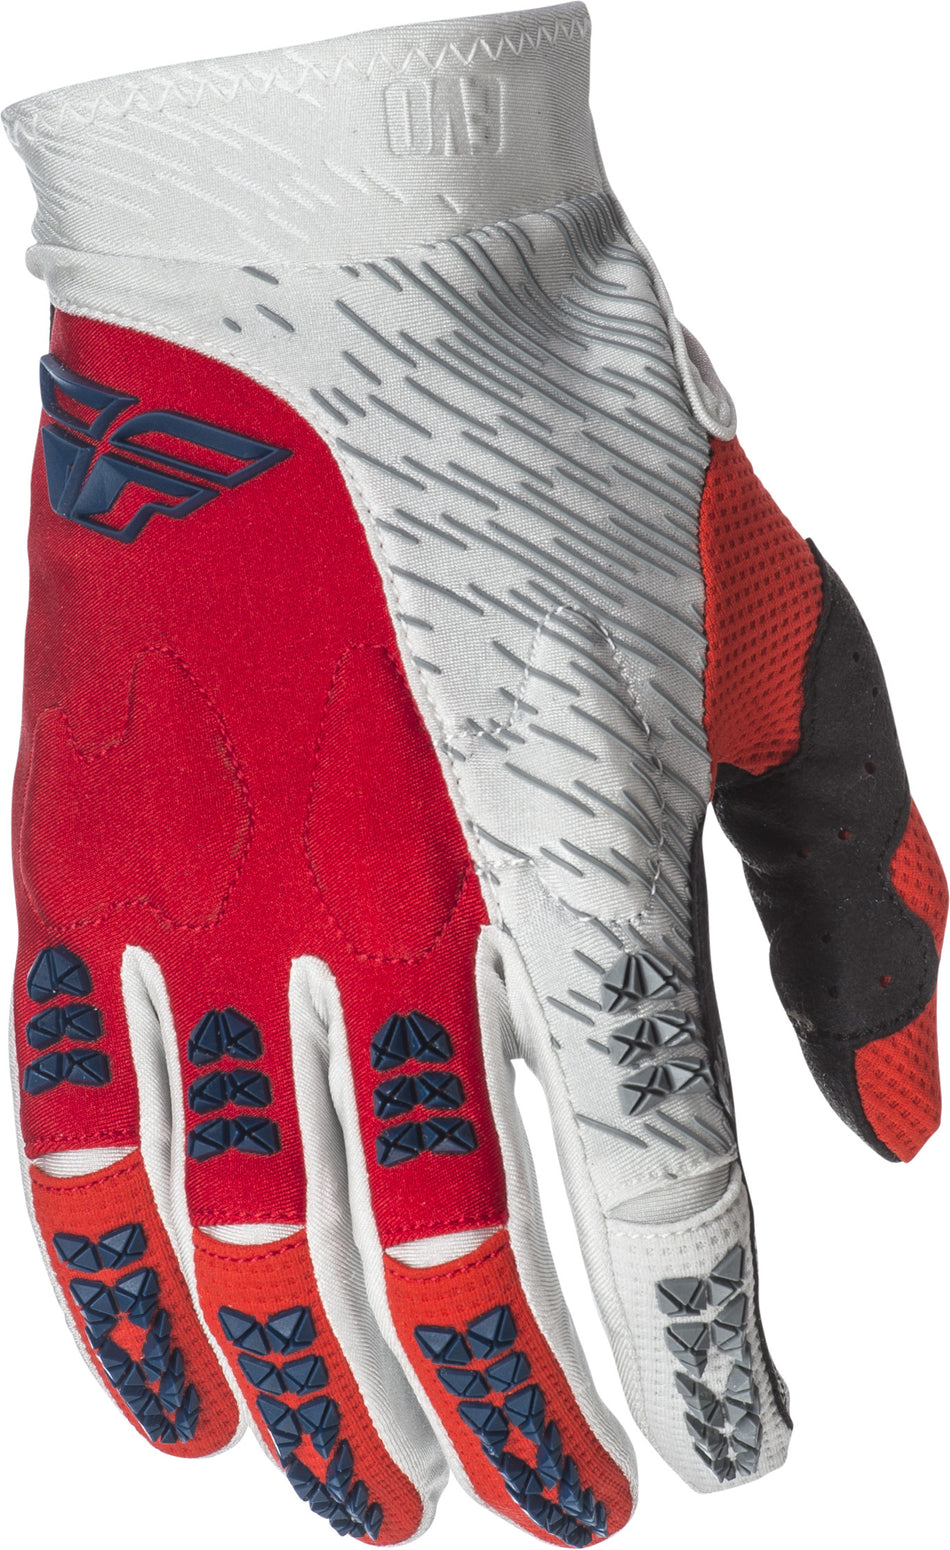 FLY RACING Evolution 2.0 Gloves Red/Grey/White Sz 11 371-11211